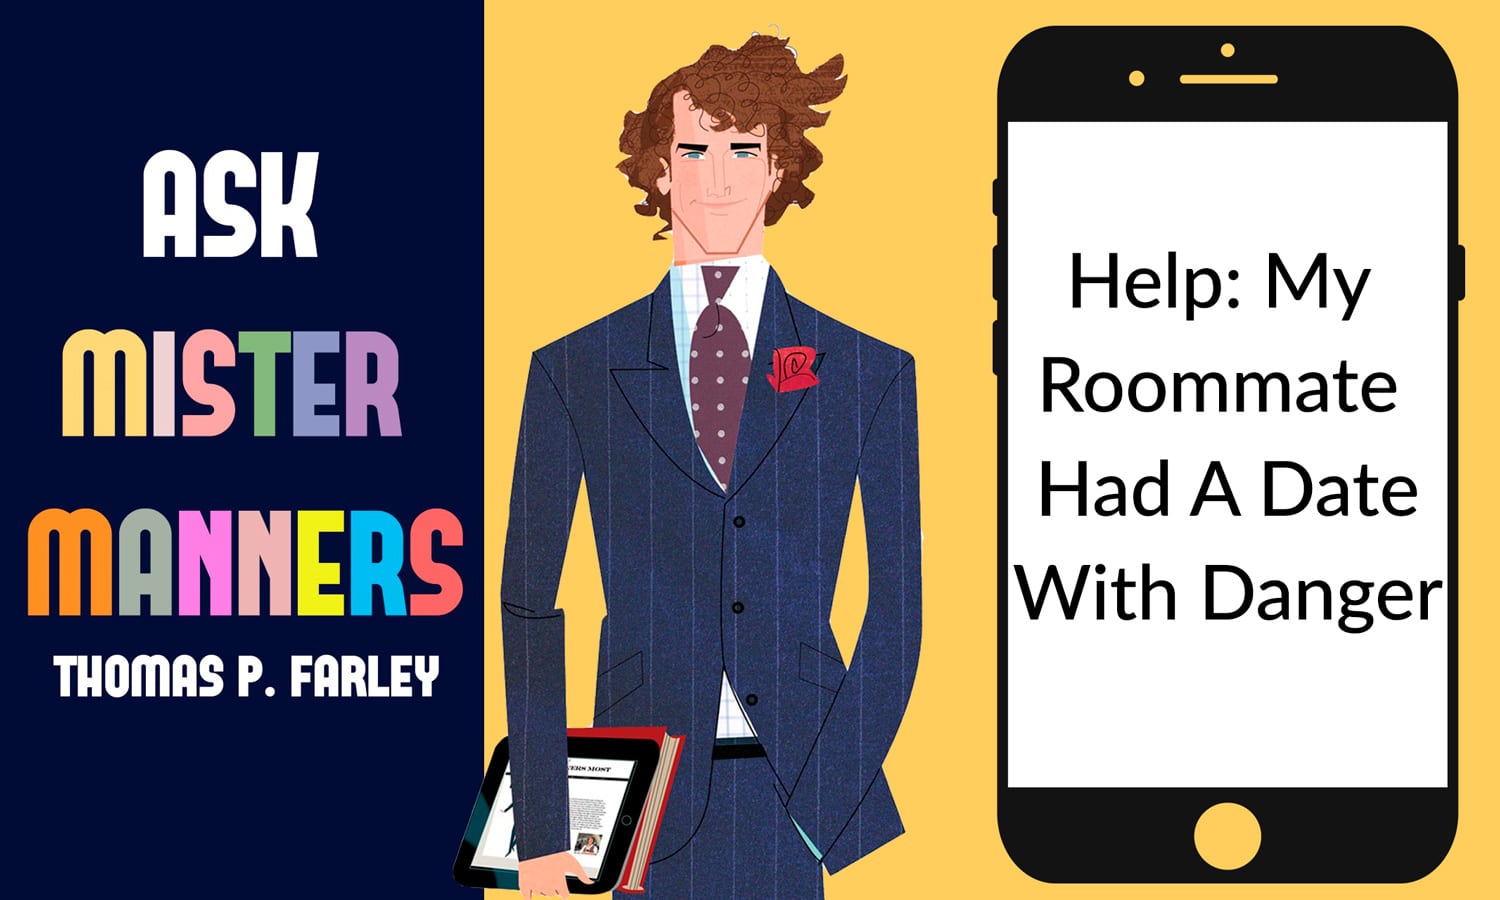 Ask Mister Manners, Thomas P. Farley: 'My Roommate Had A Date With Danger'